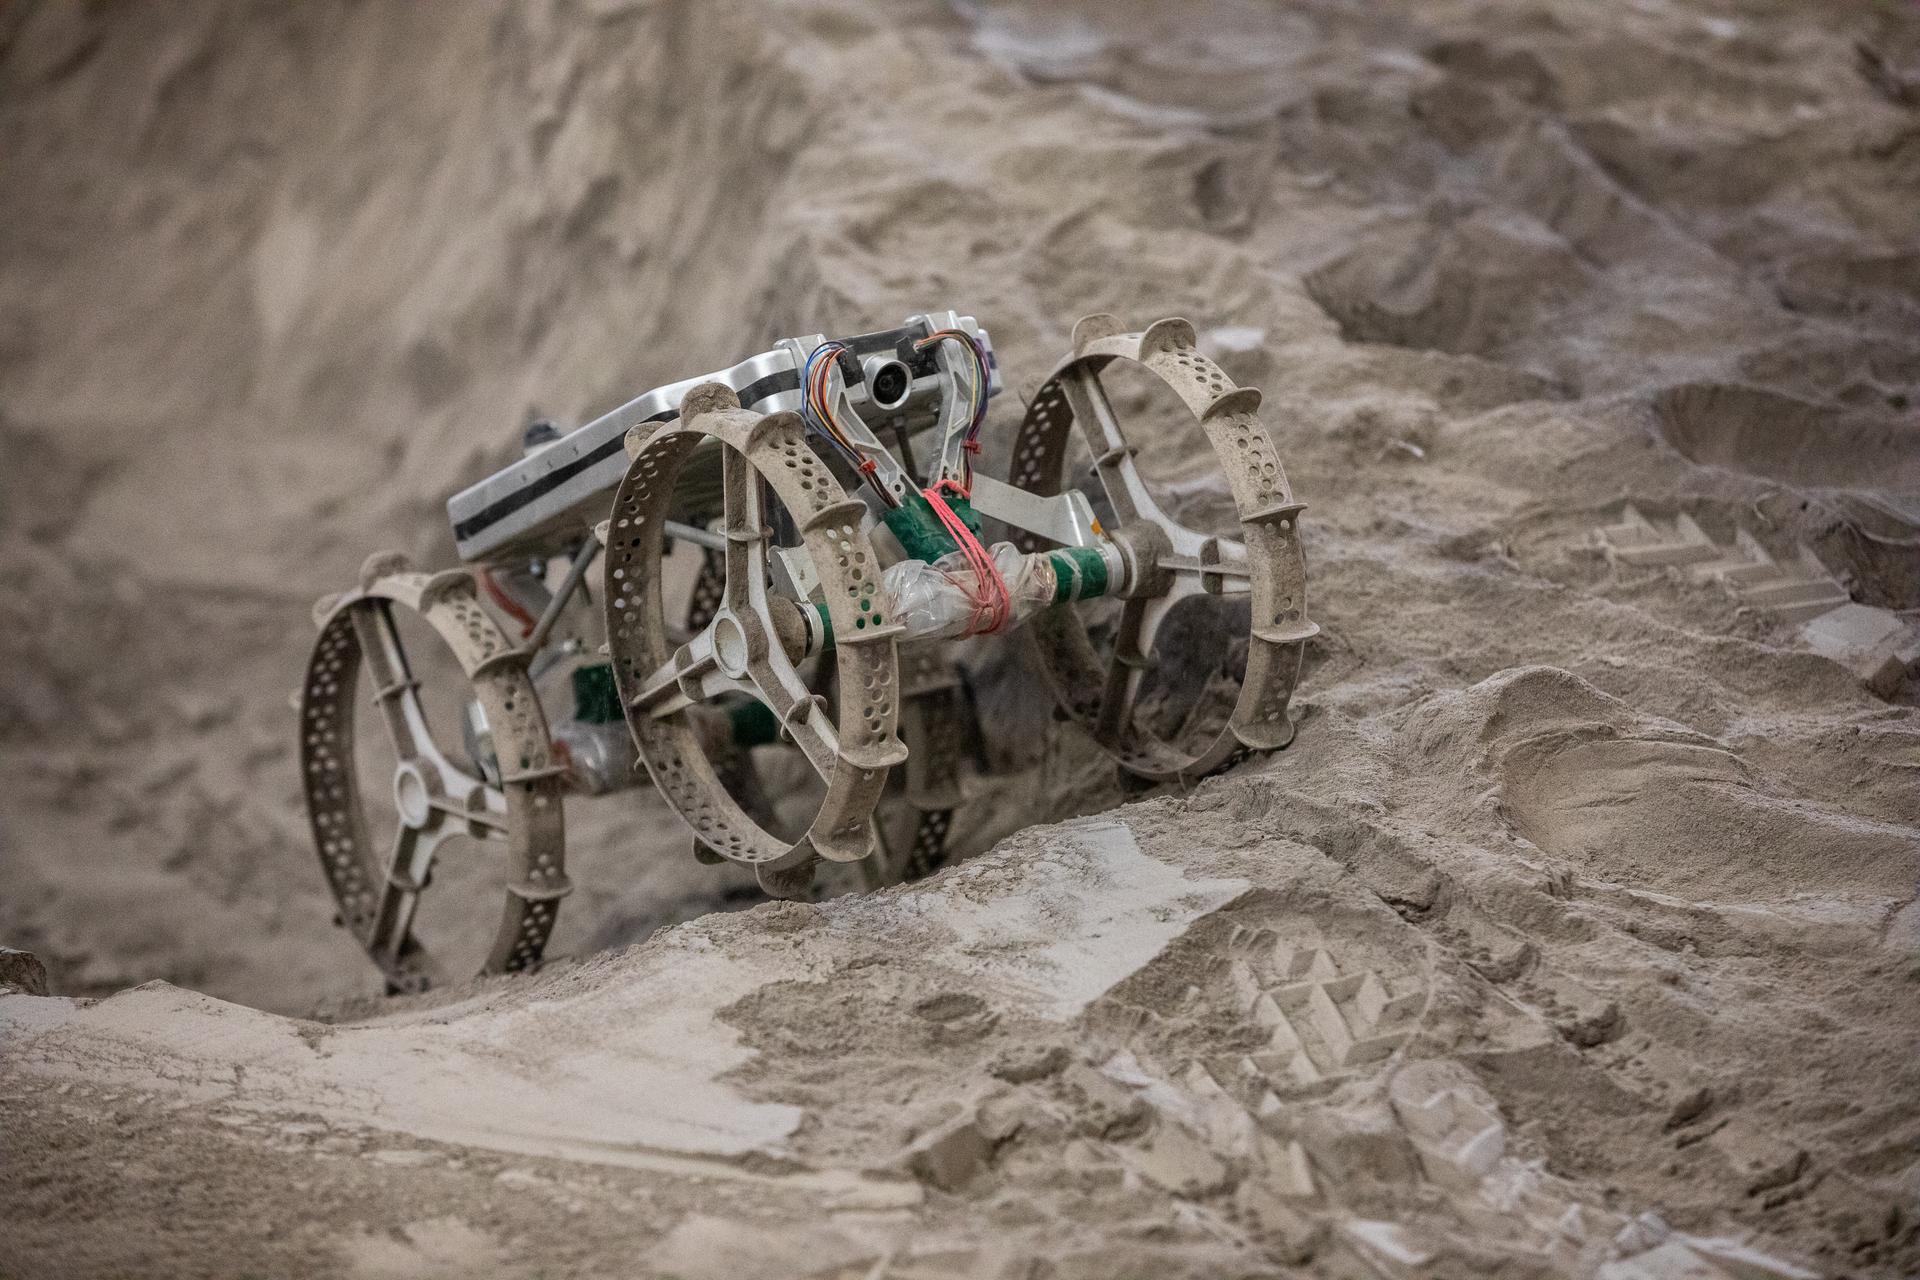 The Astrobotic CubeRover traverses the terrain in the regolith bin on Dec. 10, 2020, at NASA's Kennedy Space Center in Florida.